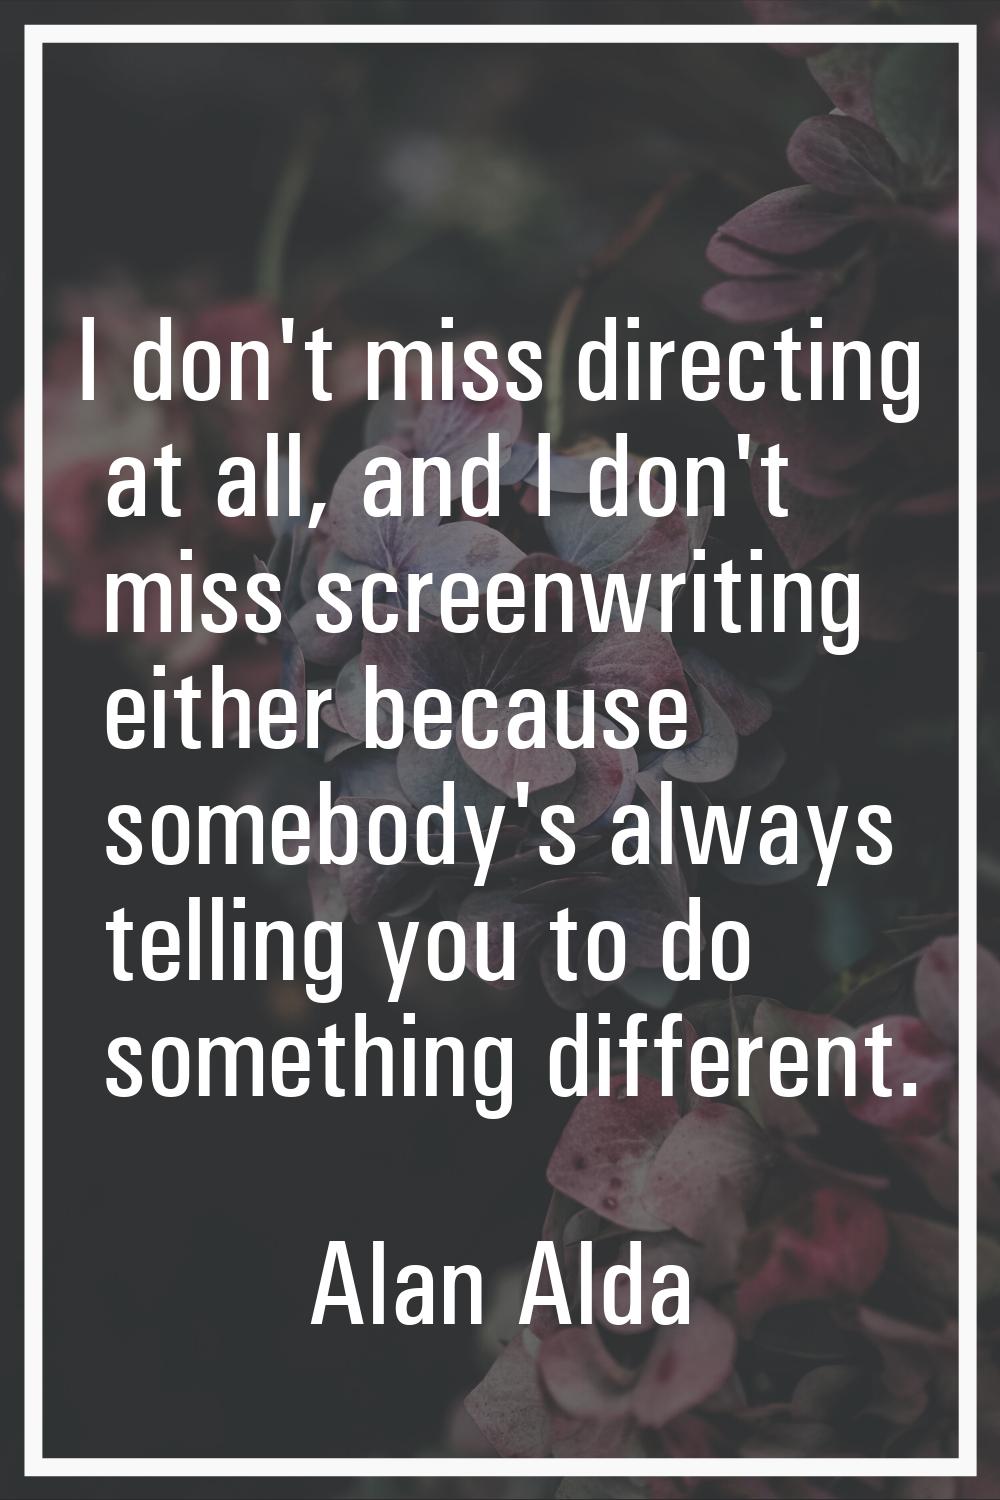 I don't miss directing at all, and I don't miss screenwriting either because somebody's always tell